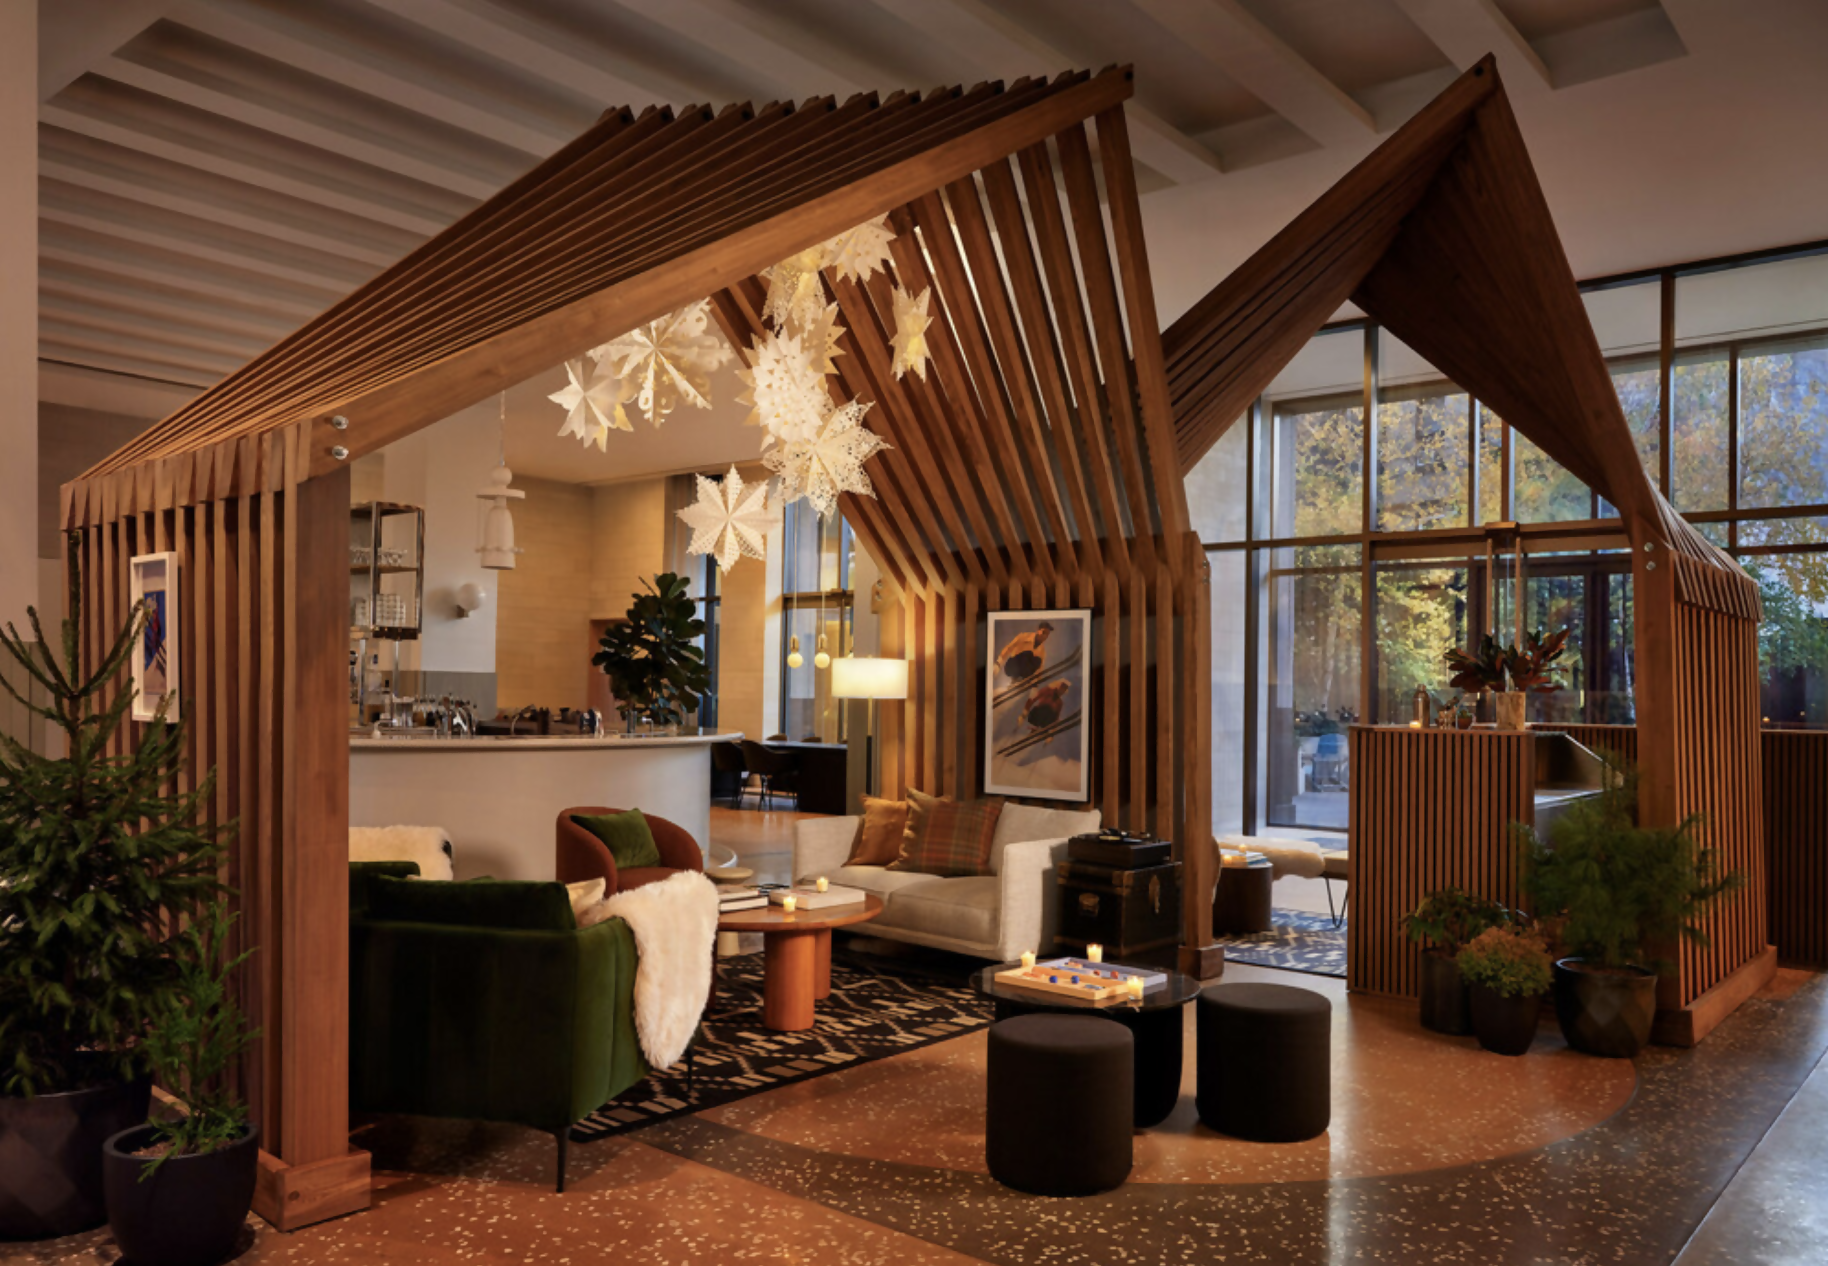 Indoor Winter Chalets Let You Get Cozy at IHG Hotels & Resorts this Season